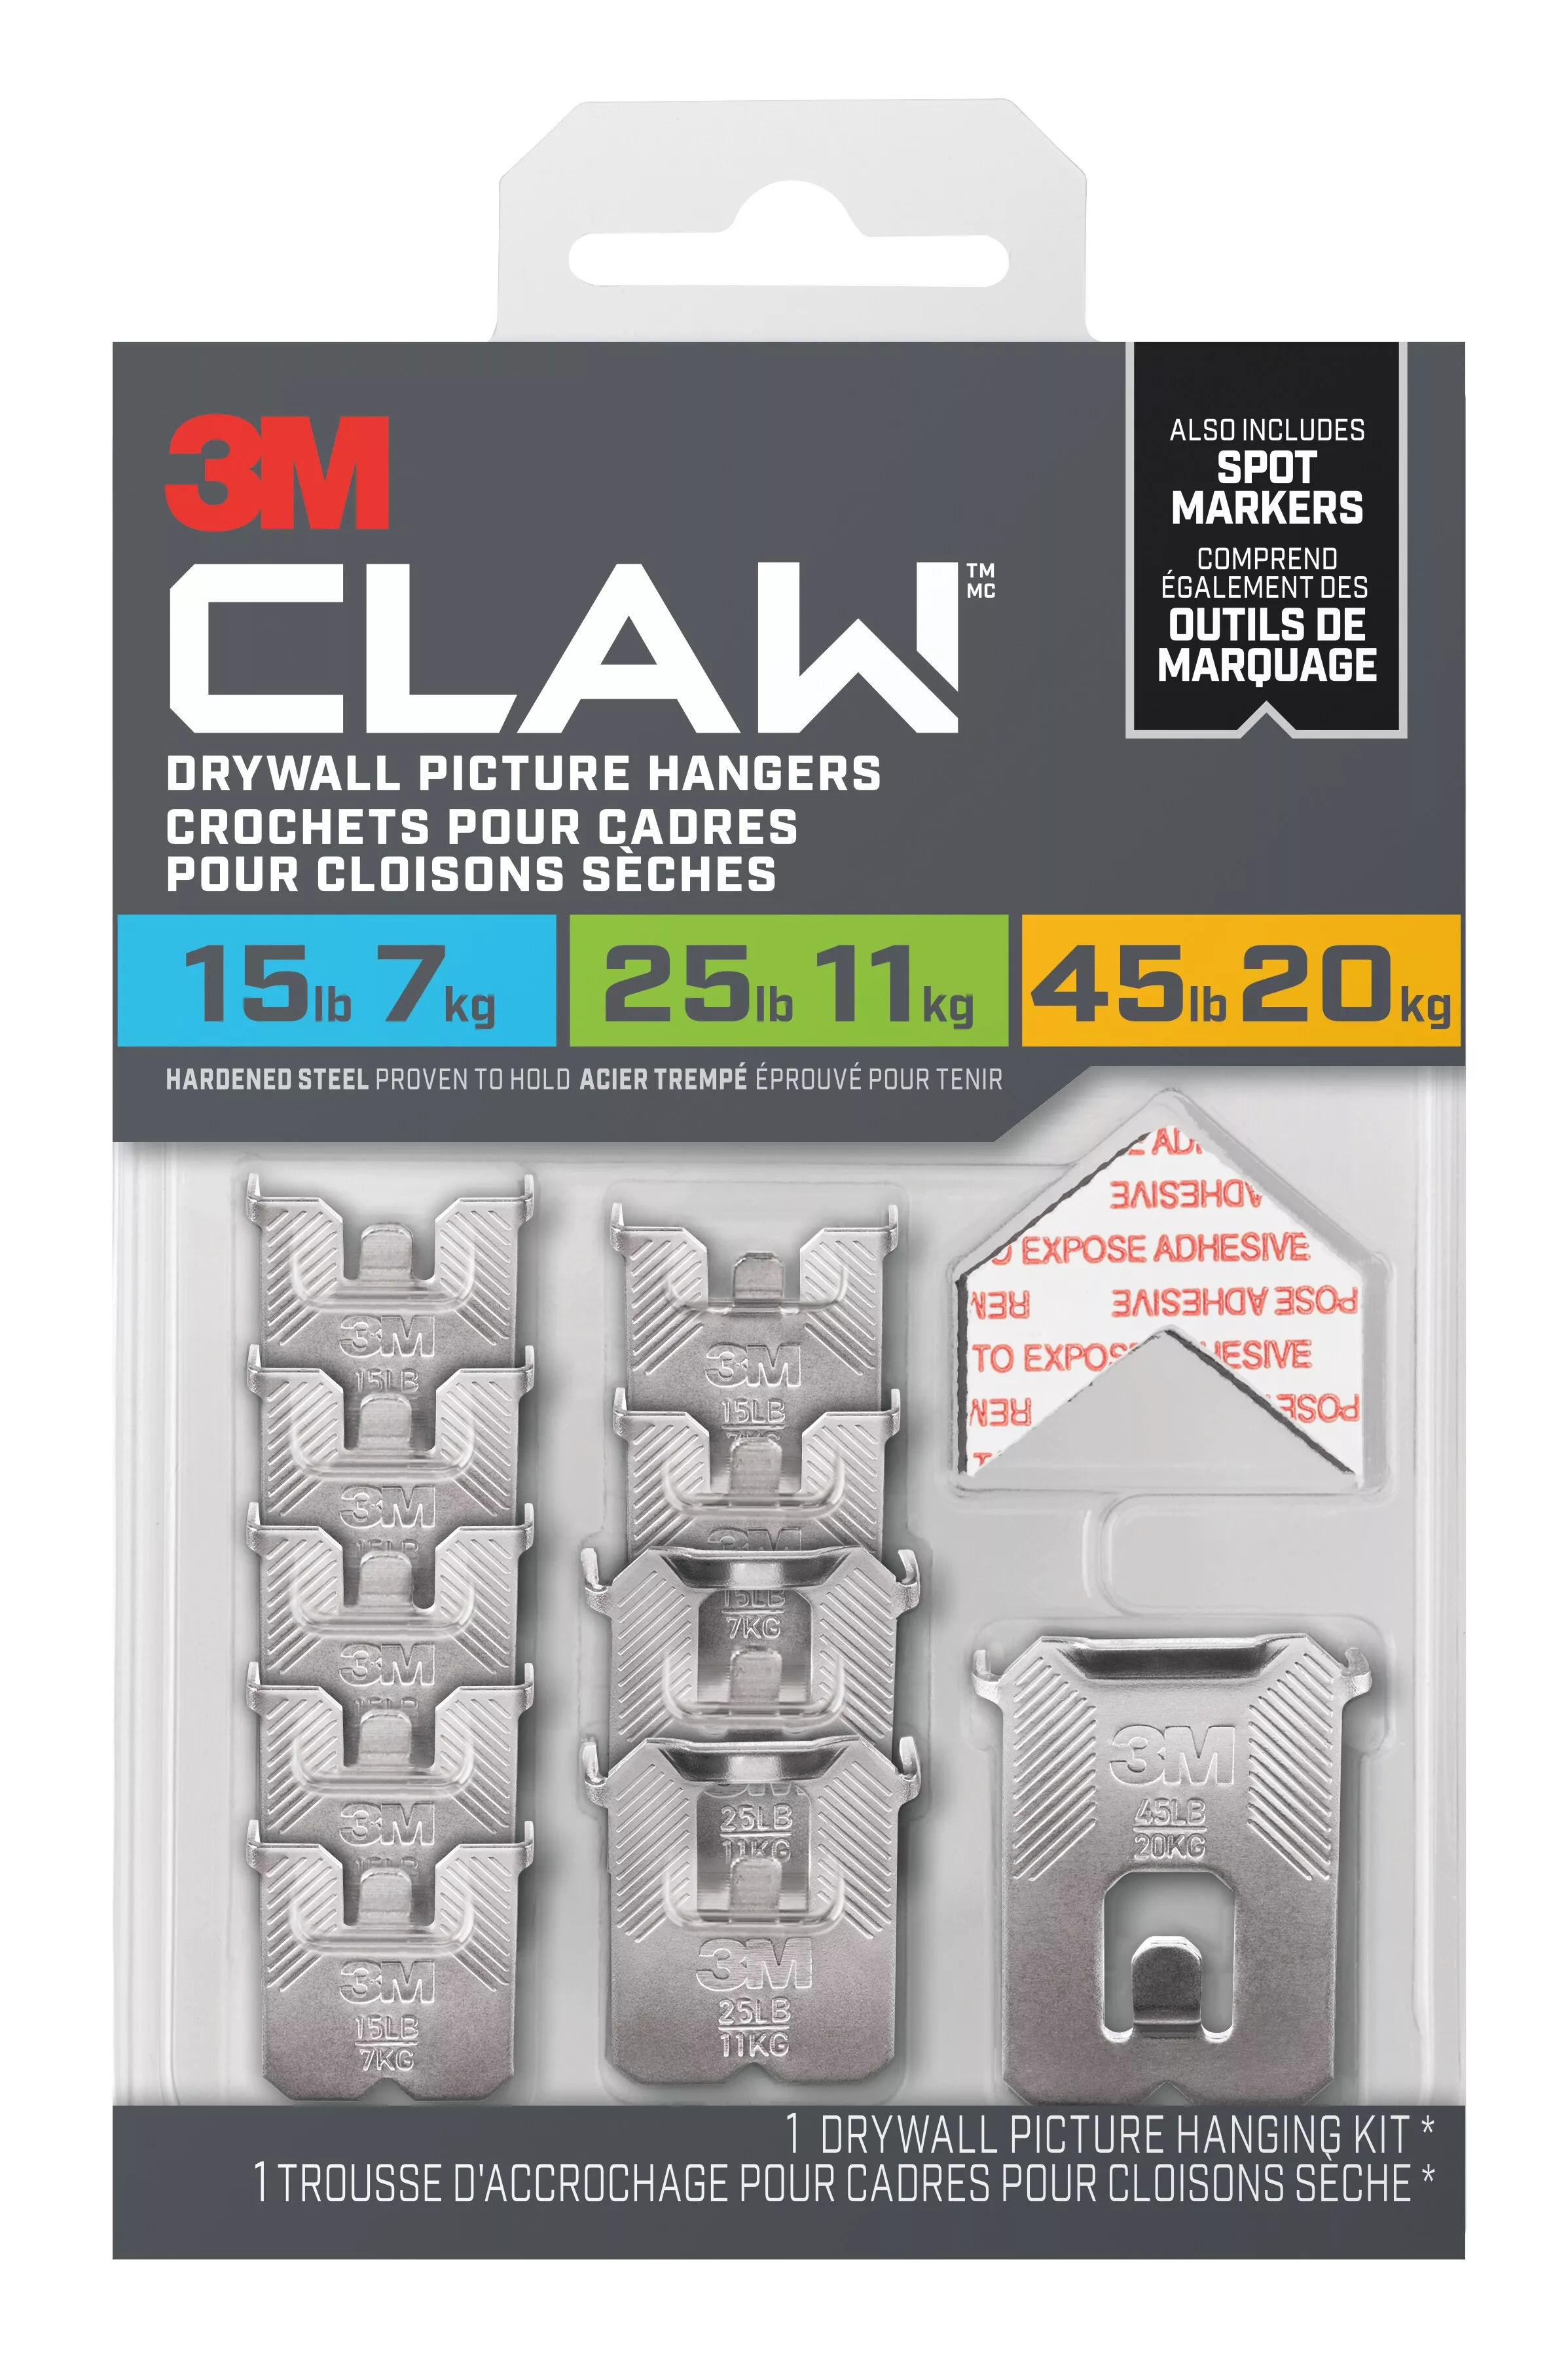 3M CLAW™ Drywall Picture Hanger Variety Pack with Spot Markers 3PHKITM-10EF